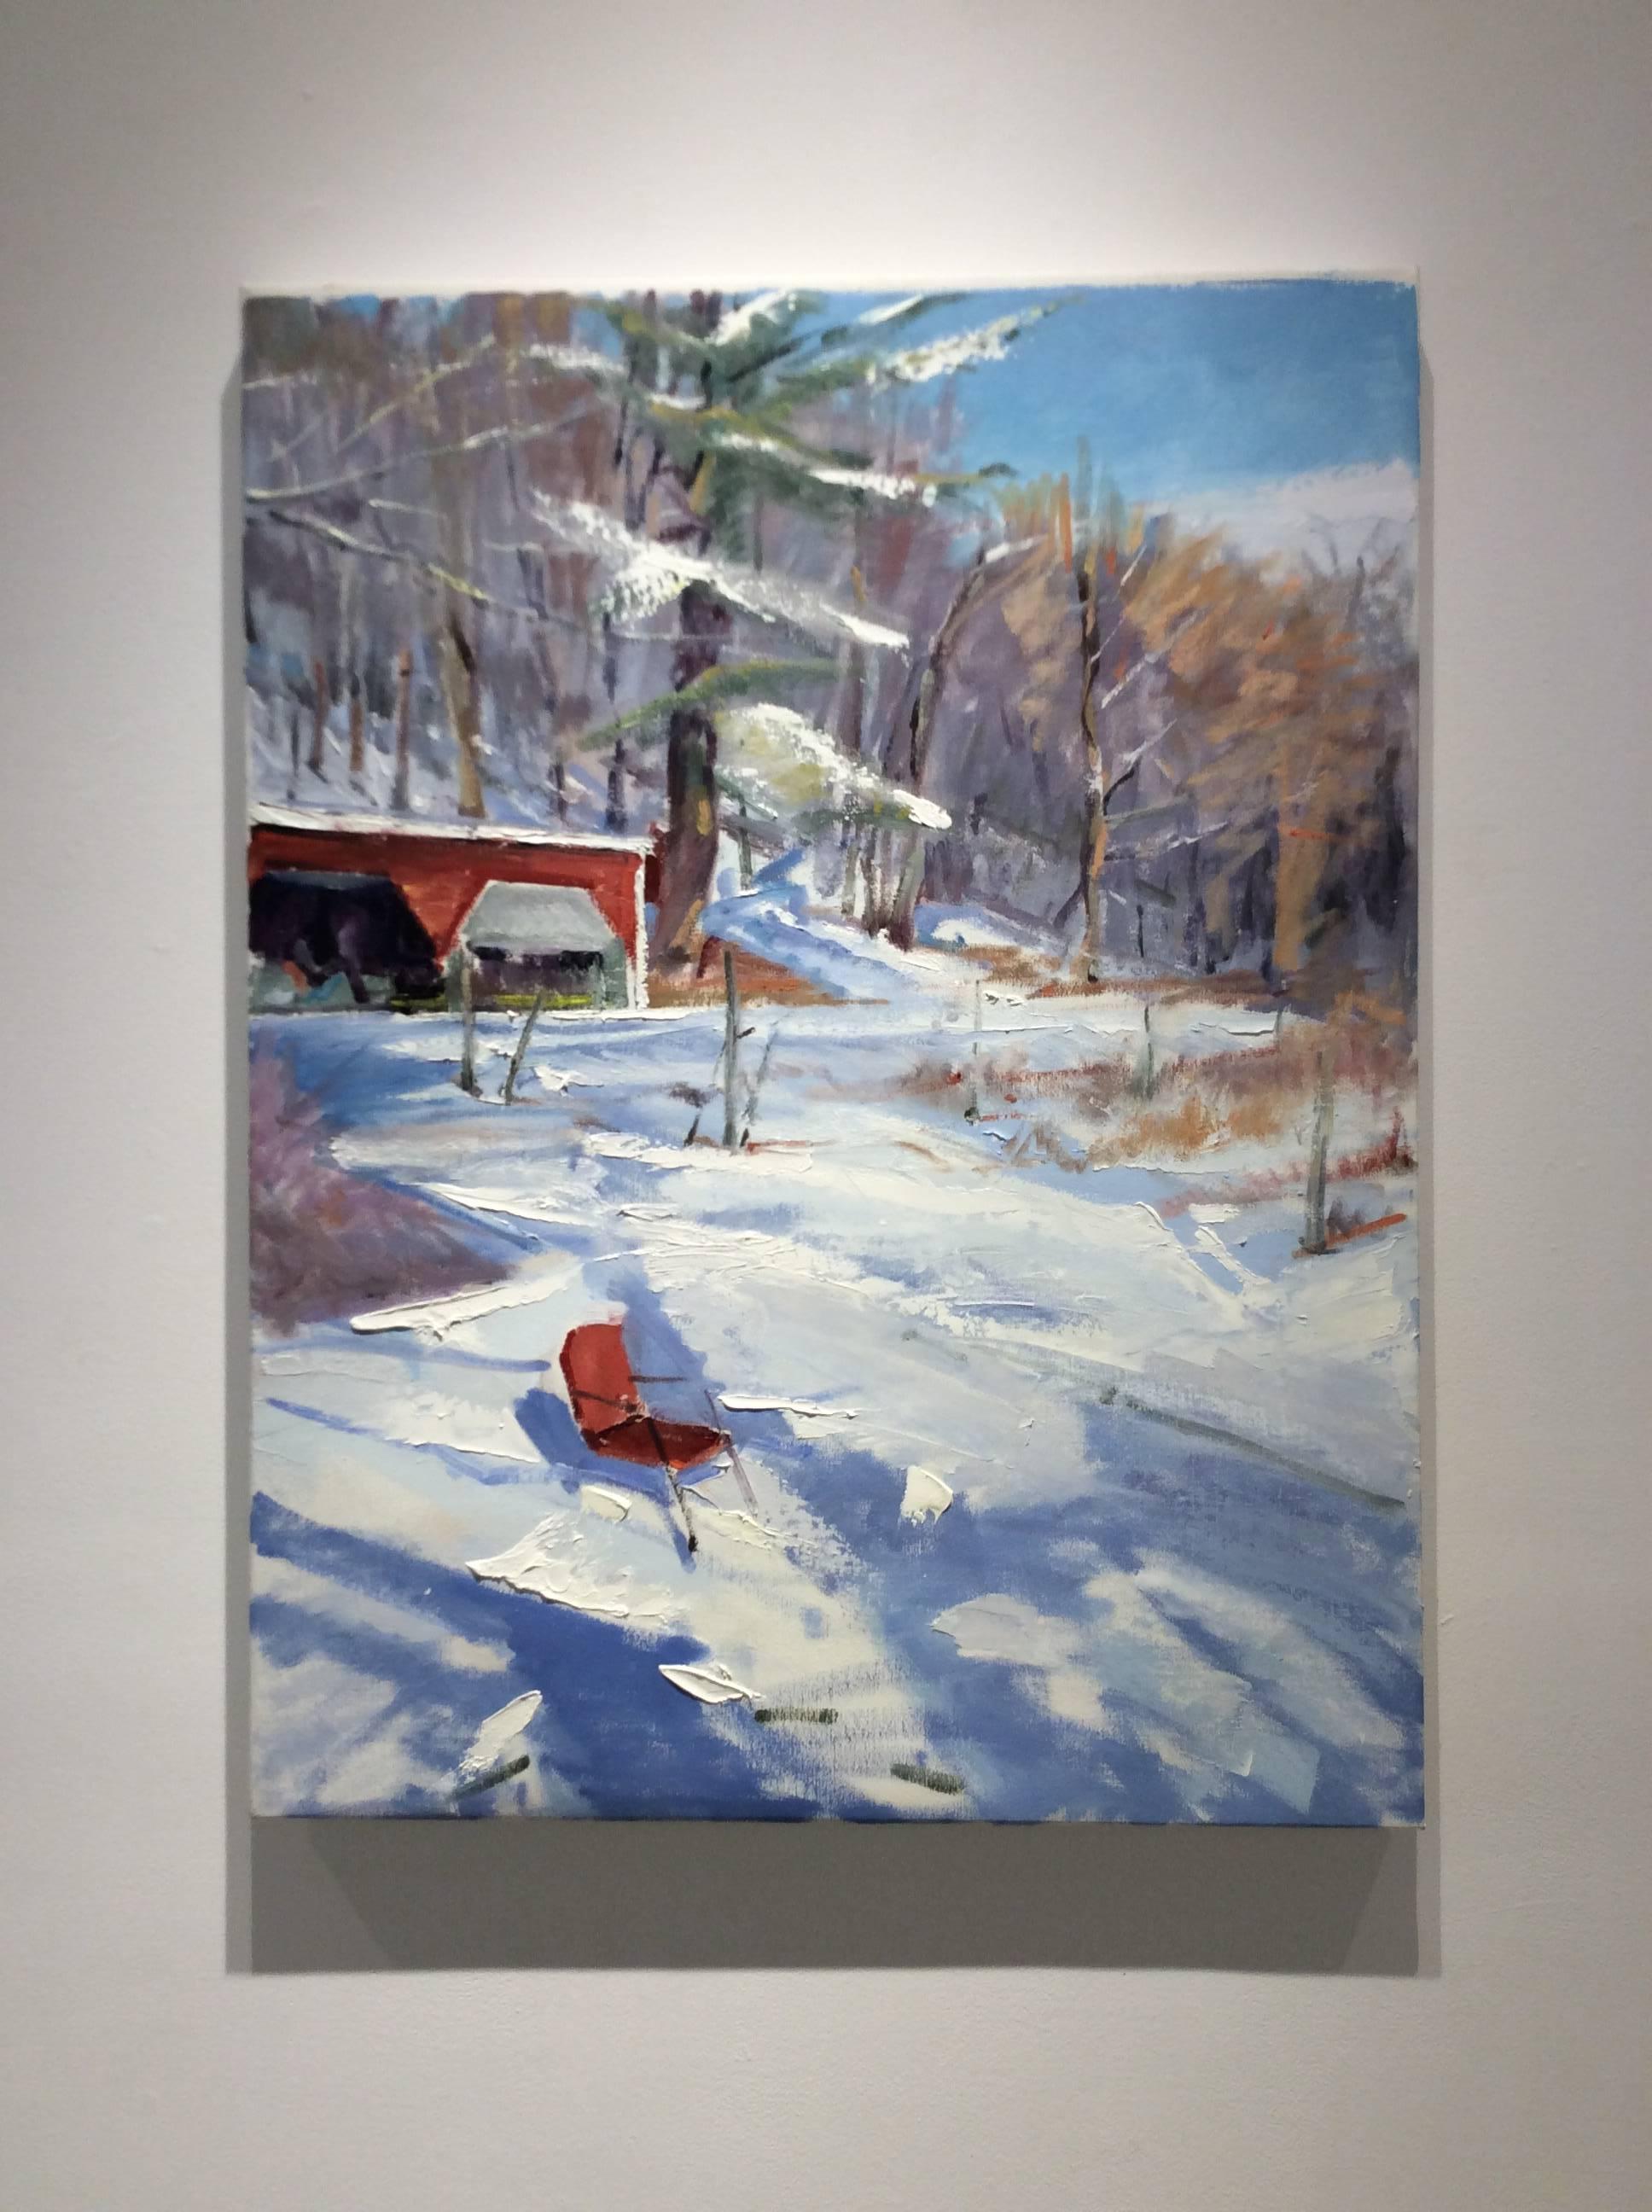 Hudson Valley landscape painting of a snowy country scene in the wintertime. 
Oil on linen, 34 x 26 inches

John Kelly approaches the Hudson Valley landscape with the eye of an architect and the hand of an impressionist. With intense attention paid